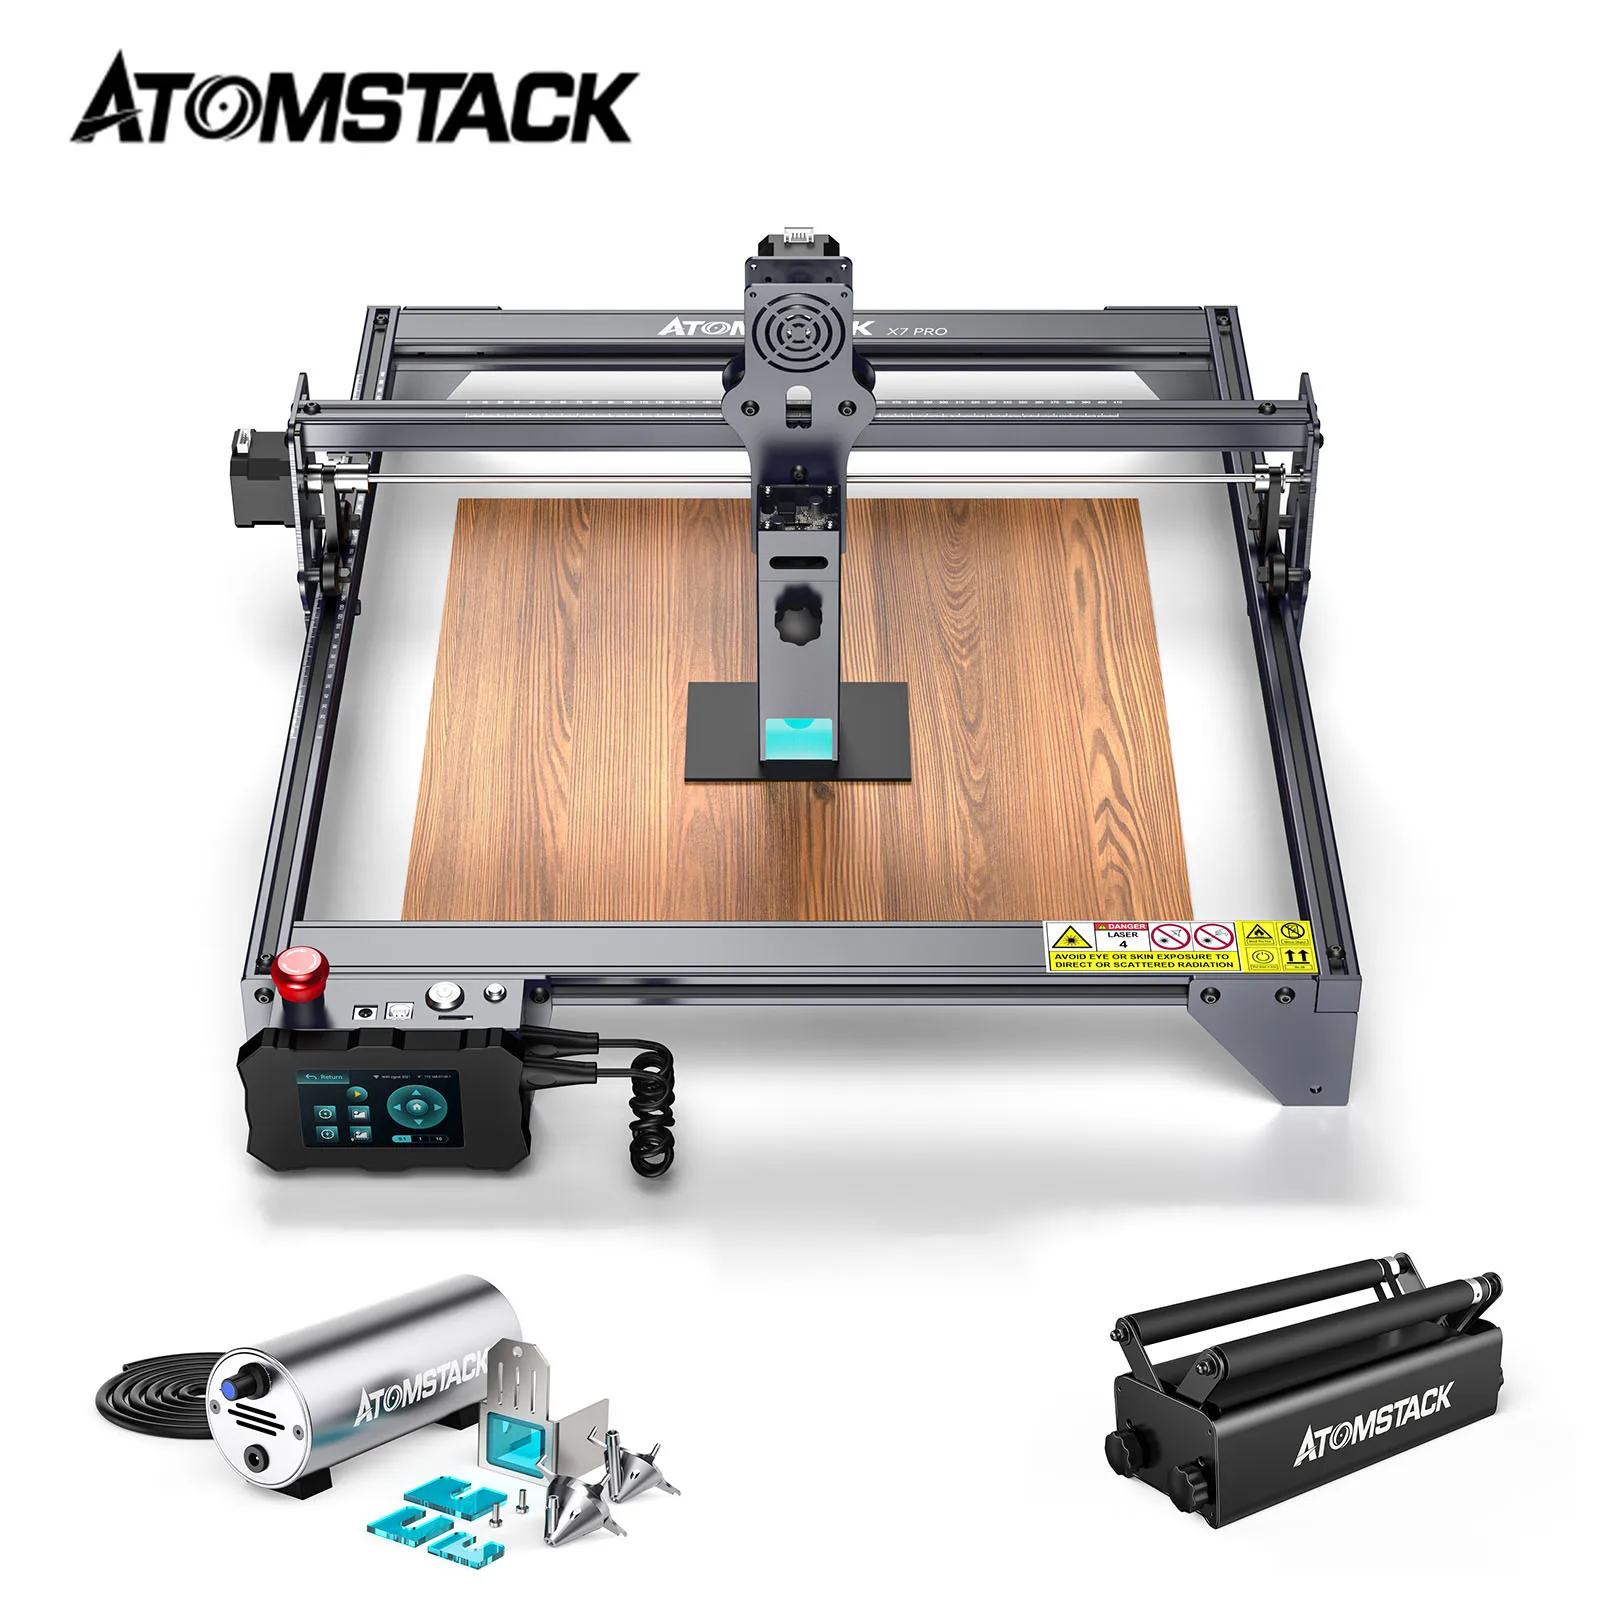 

ATOMSTACK X7 Pro + AIR Airflow Assist Kit + R3 Roller 50W Dual Laser Engraver Machine Engraving Metal Cutter Wood CNC Router